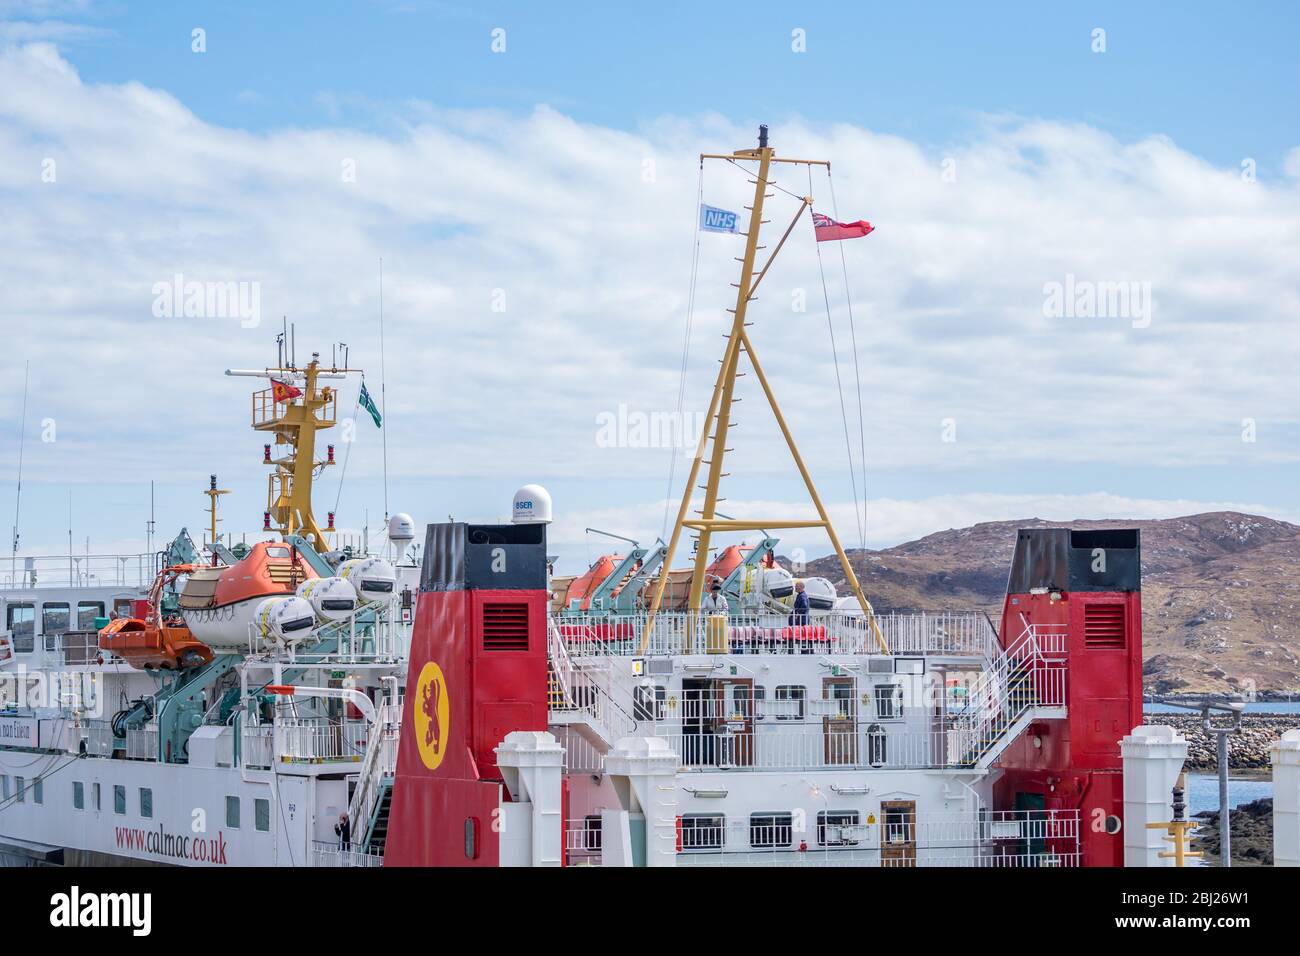 NHS, Thank you heroes flag, with red ensign flying on mast on Calmac Ferry Lord of the Isles in South Uist Outer Hebrides, Scotland Stock Photo